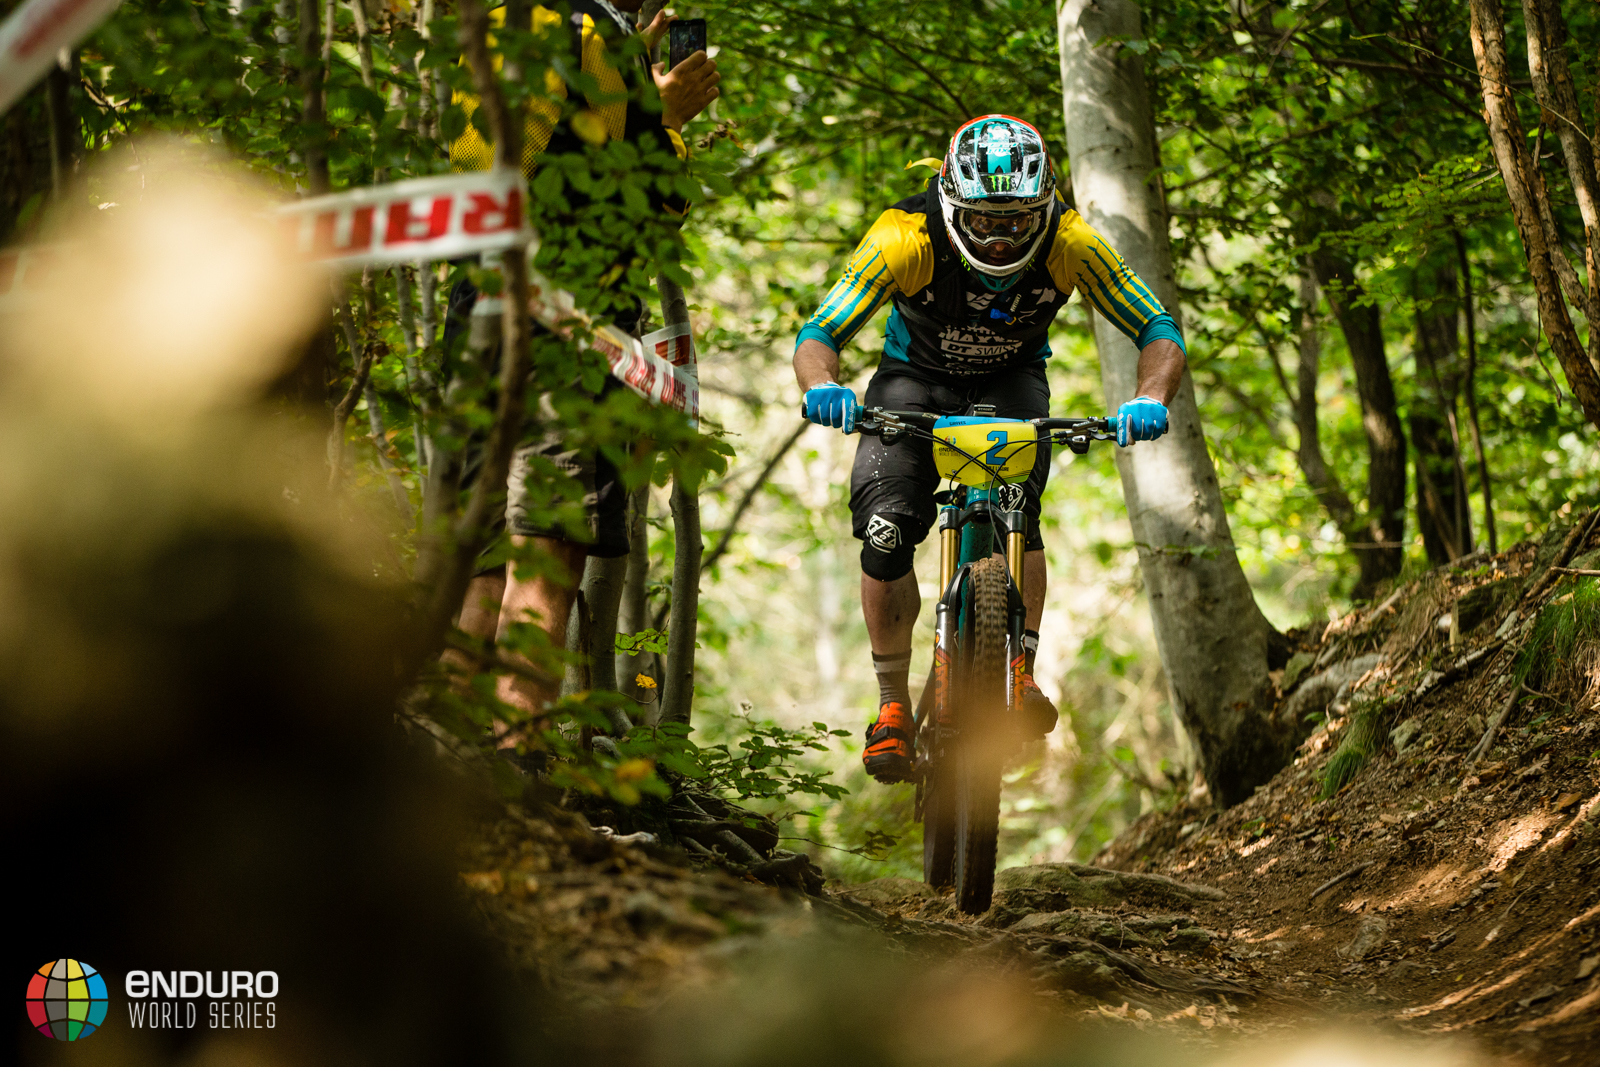 Jared Graves on stage five. EWS 7 2014, Finale Ligure. Photo by Matt Wragg